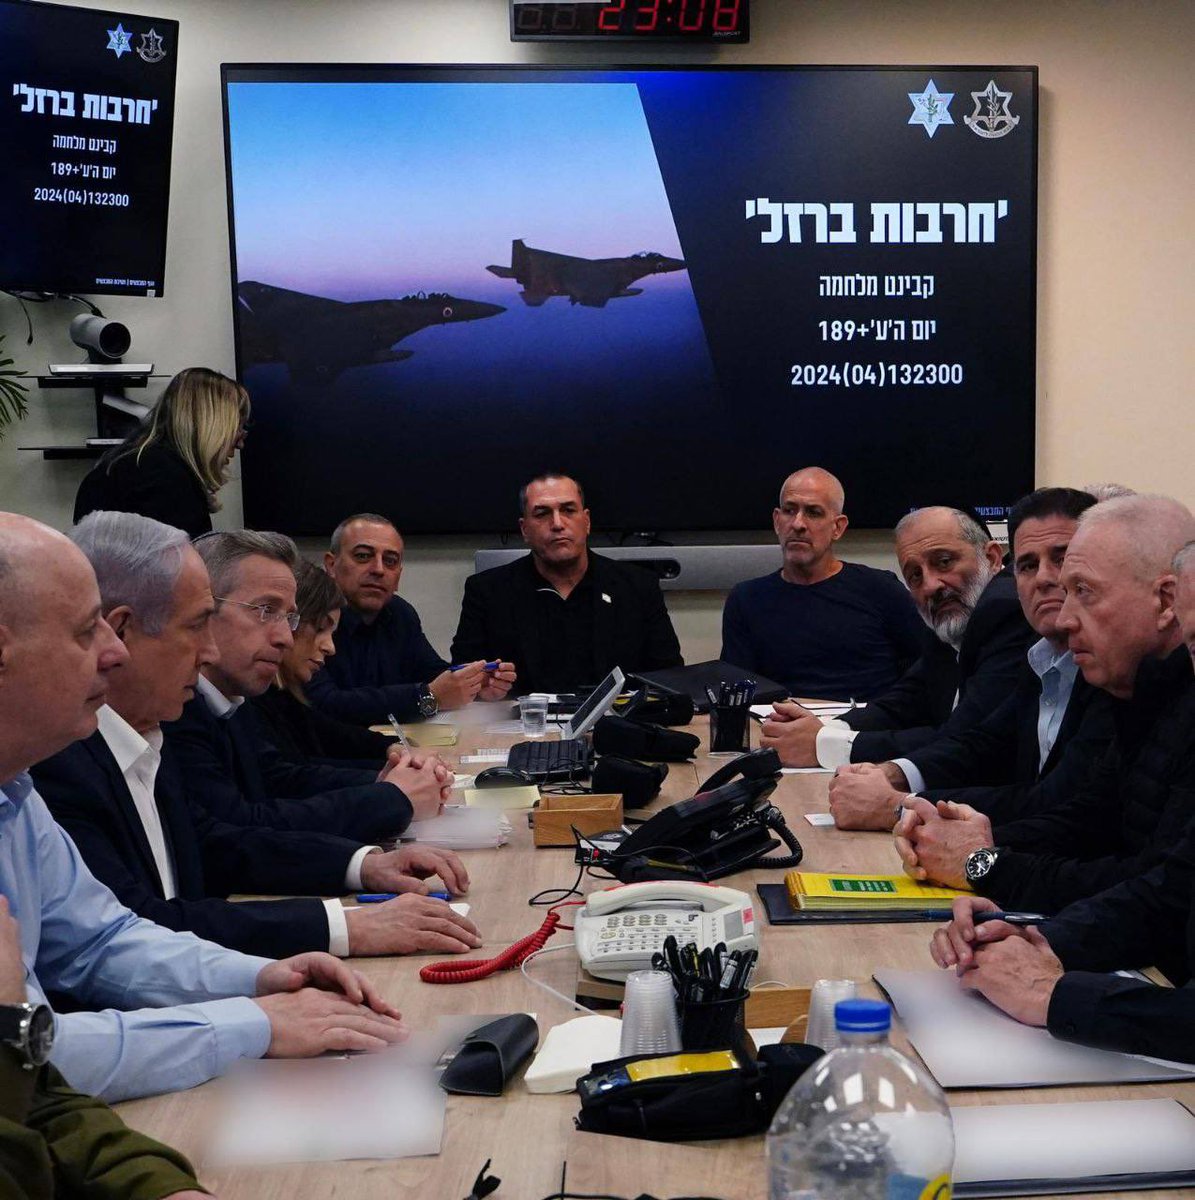 Israel’s war cabinet right now - Between 400 and 500 missiles and UAVs were launched from Iran towards Israel. #Israel #israelunderattack #israelunderfire #Iran #Israelis